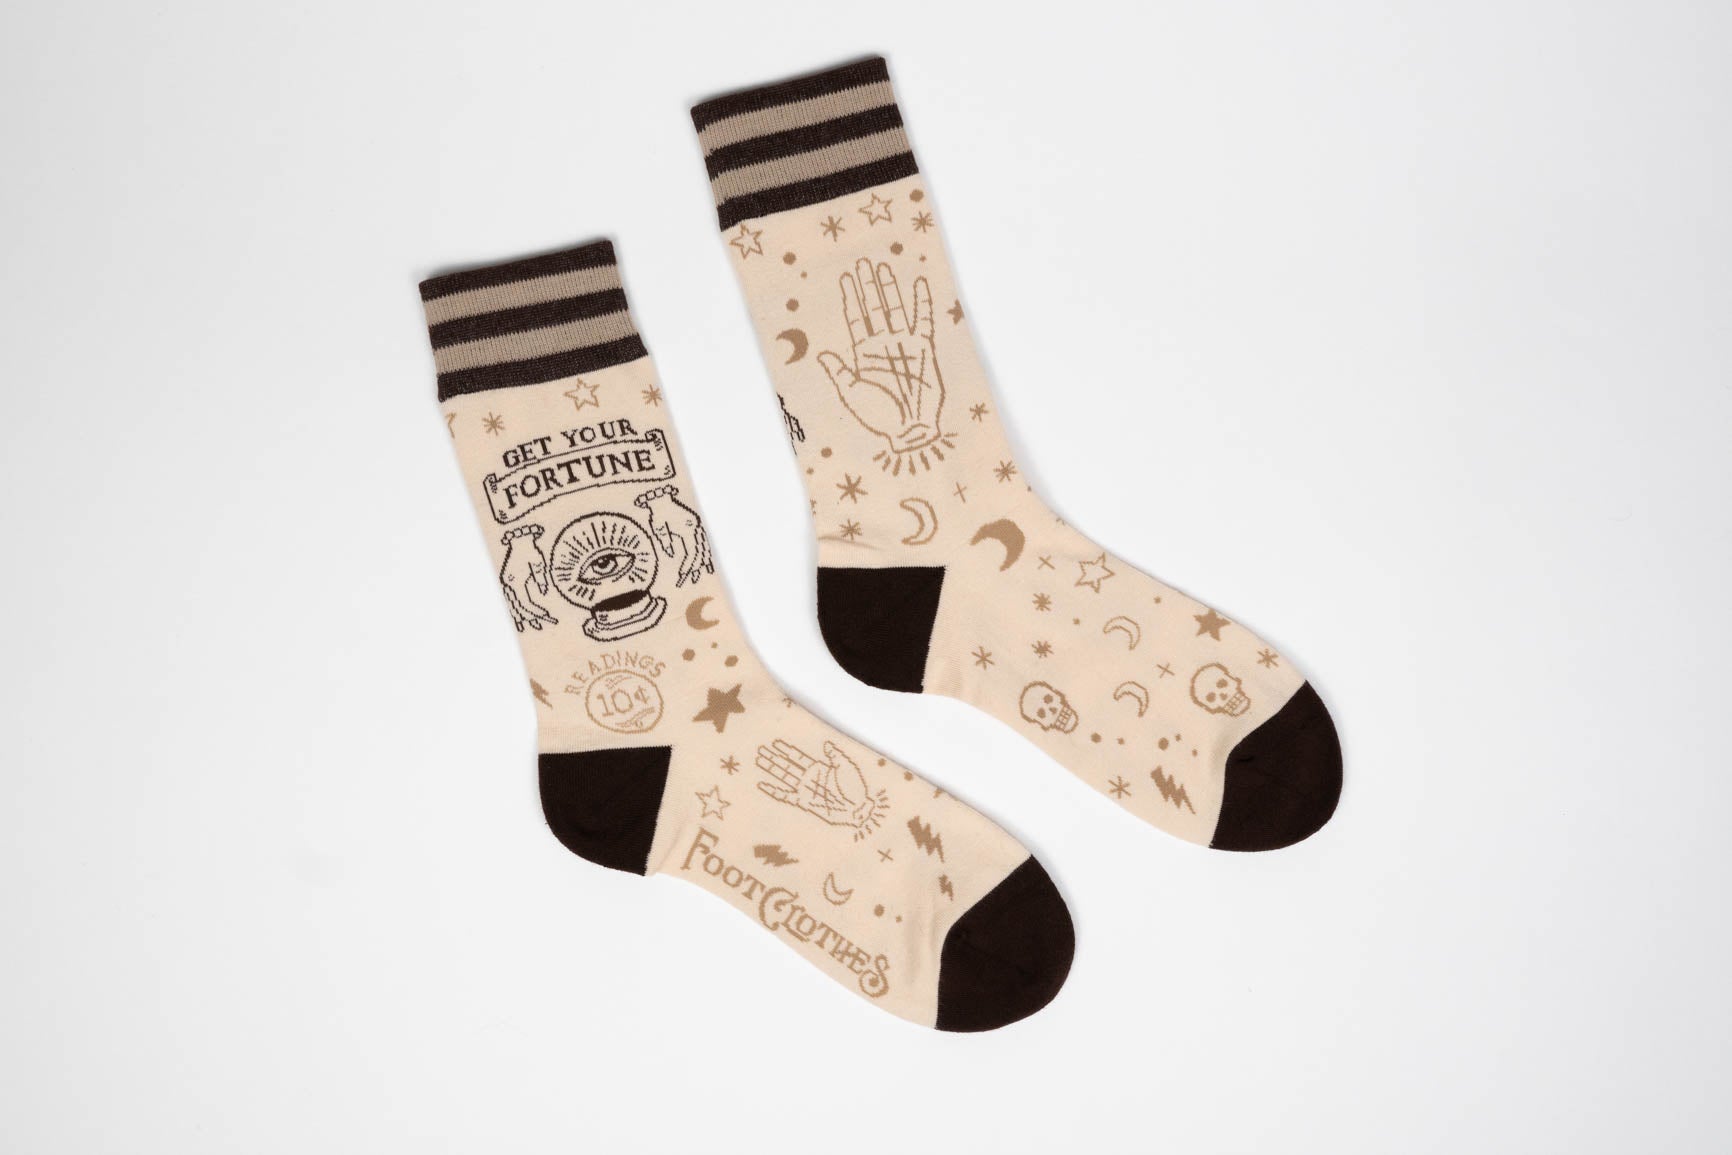 Two-Headed Tattooed Fortune Teller Pack - FootClothes